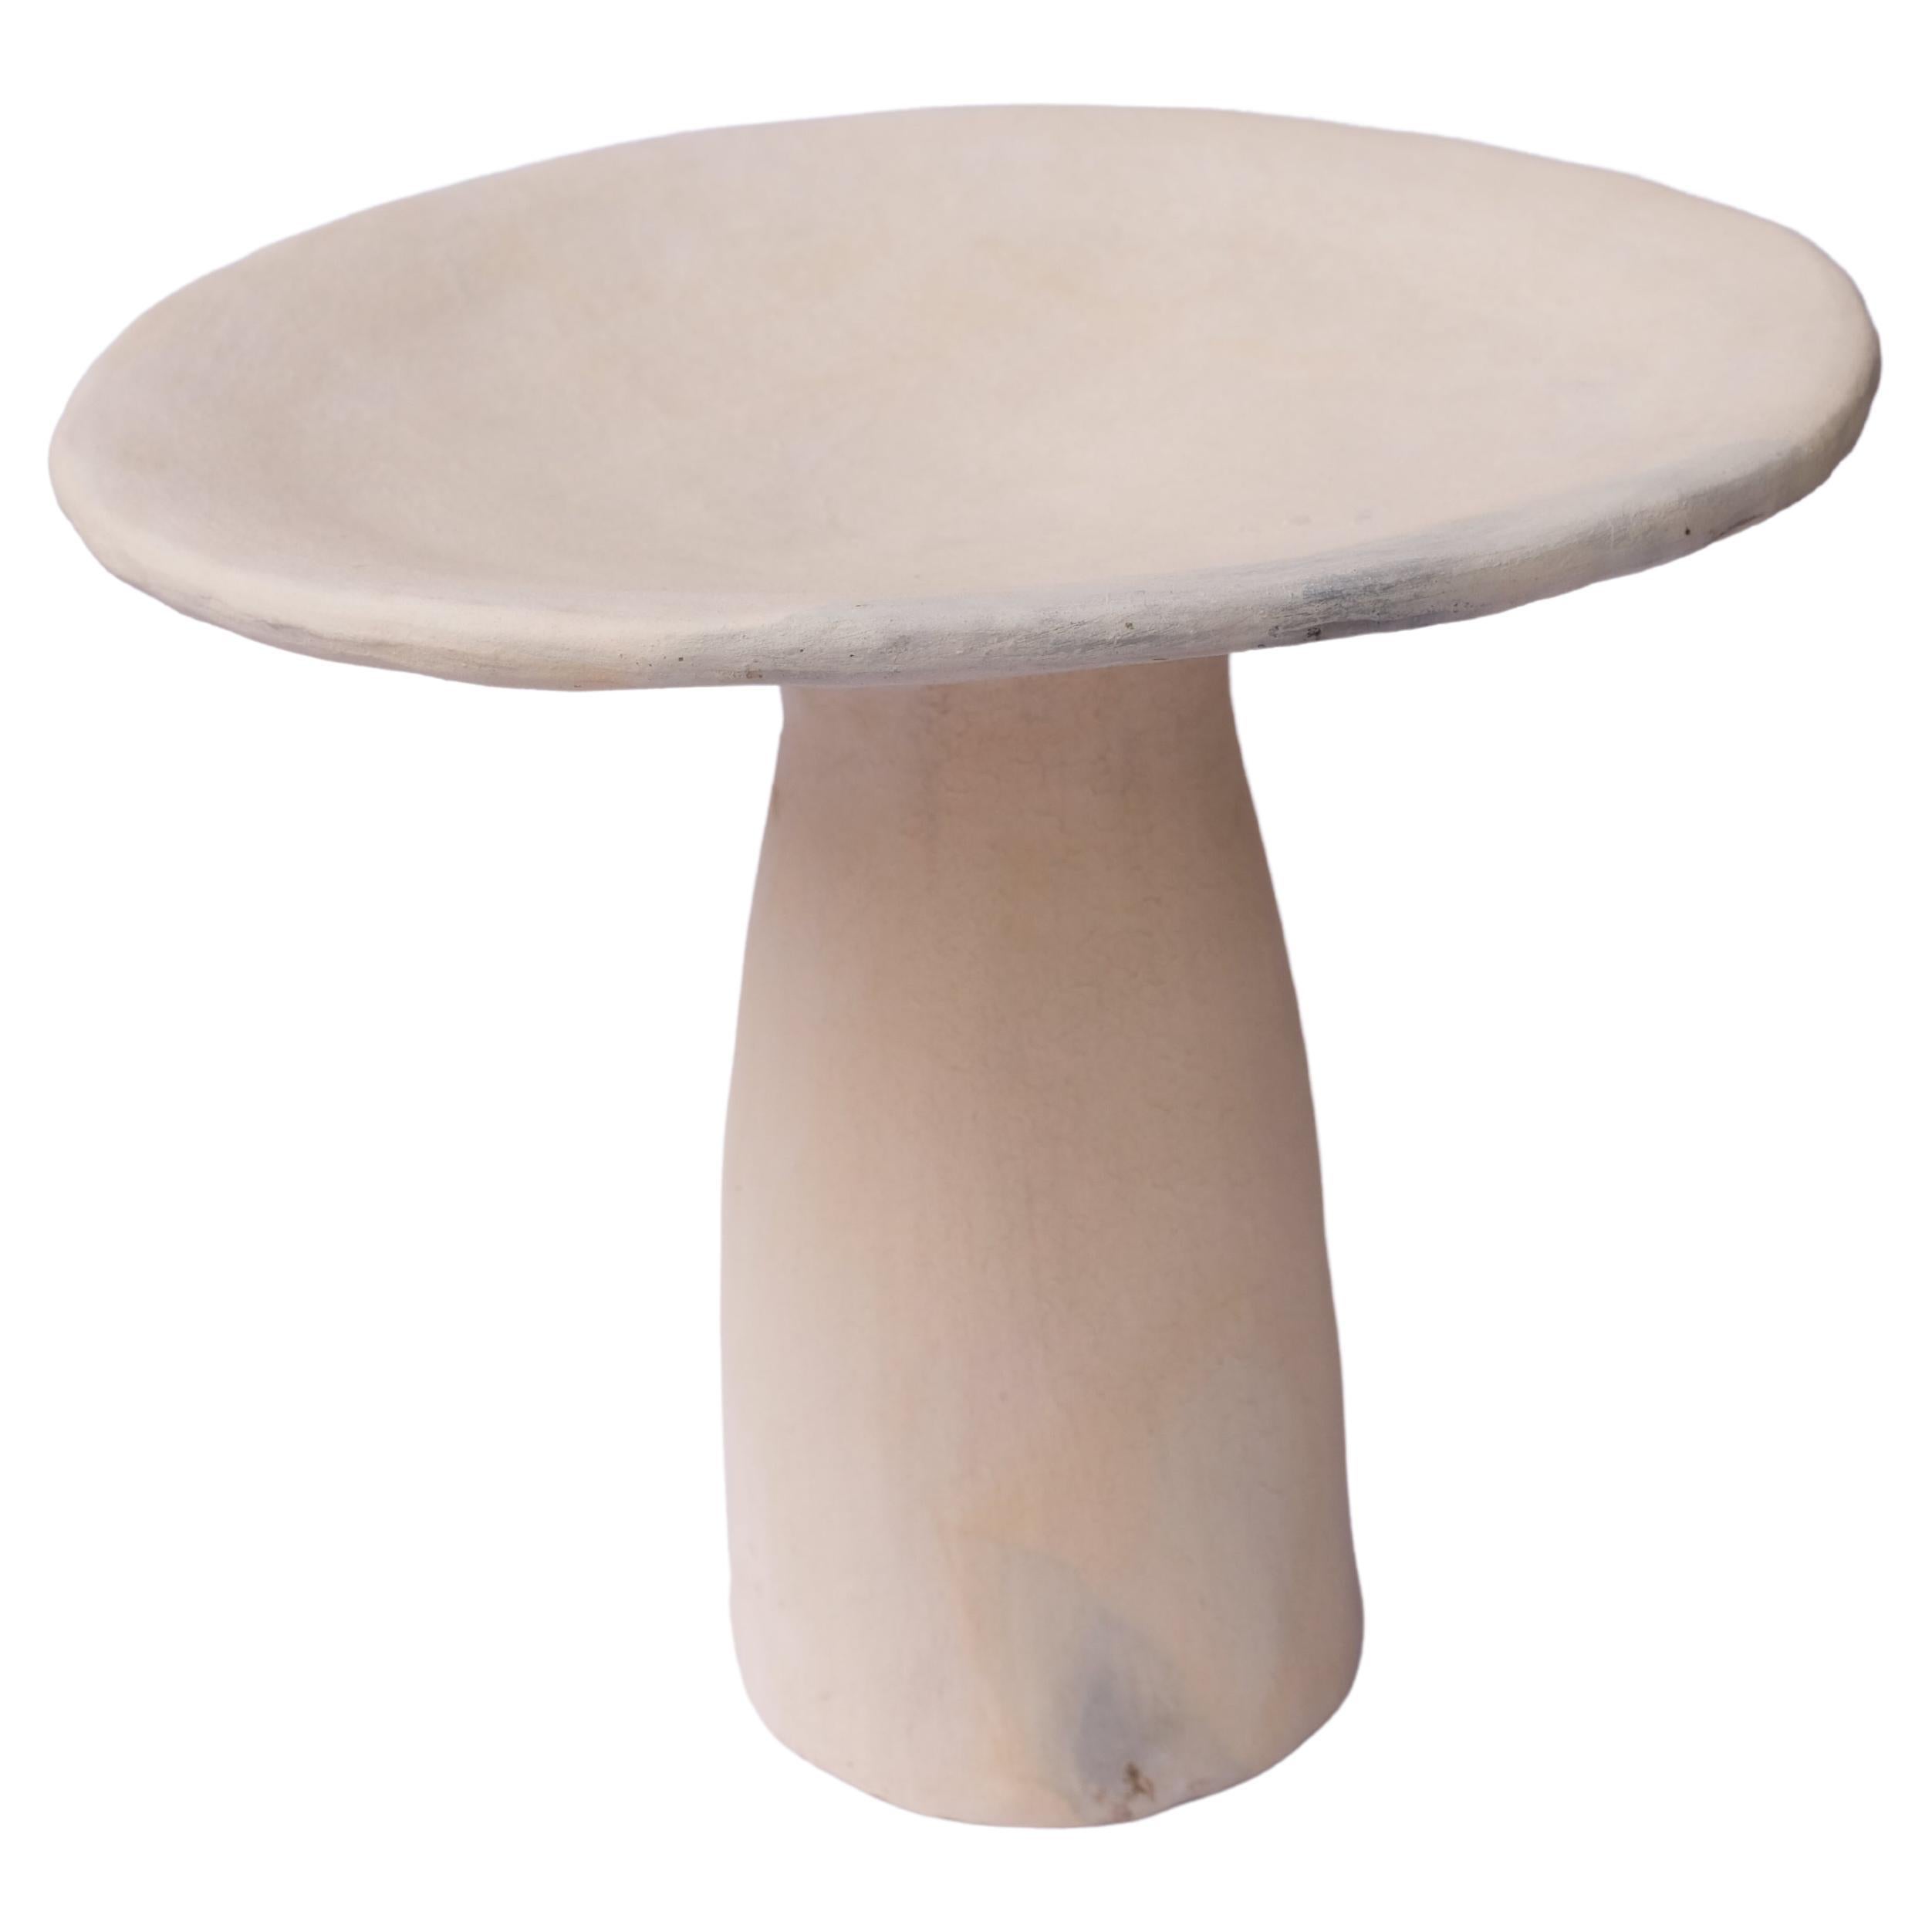 Jbel Zucar White Big Side Table Made of Clay, Handcrafted by the Potter Houda